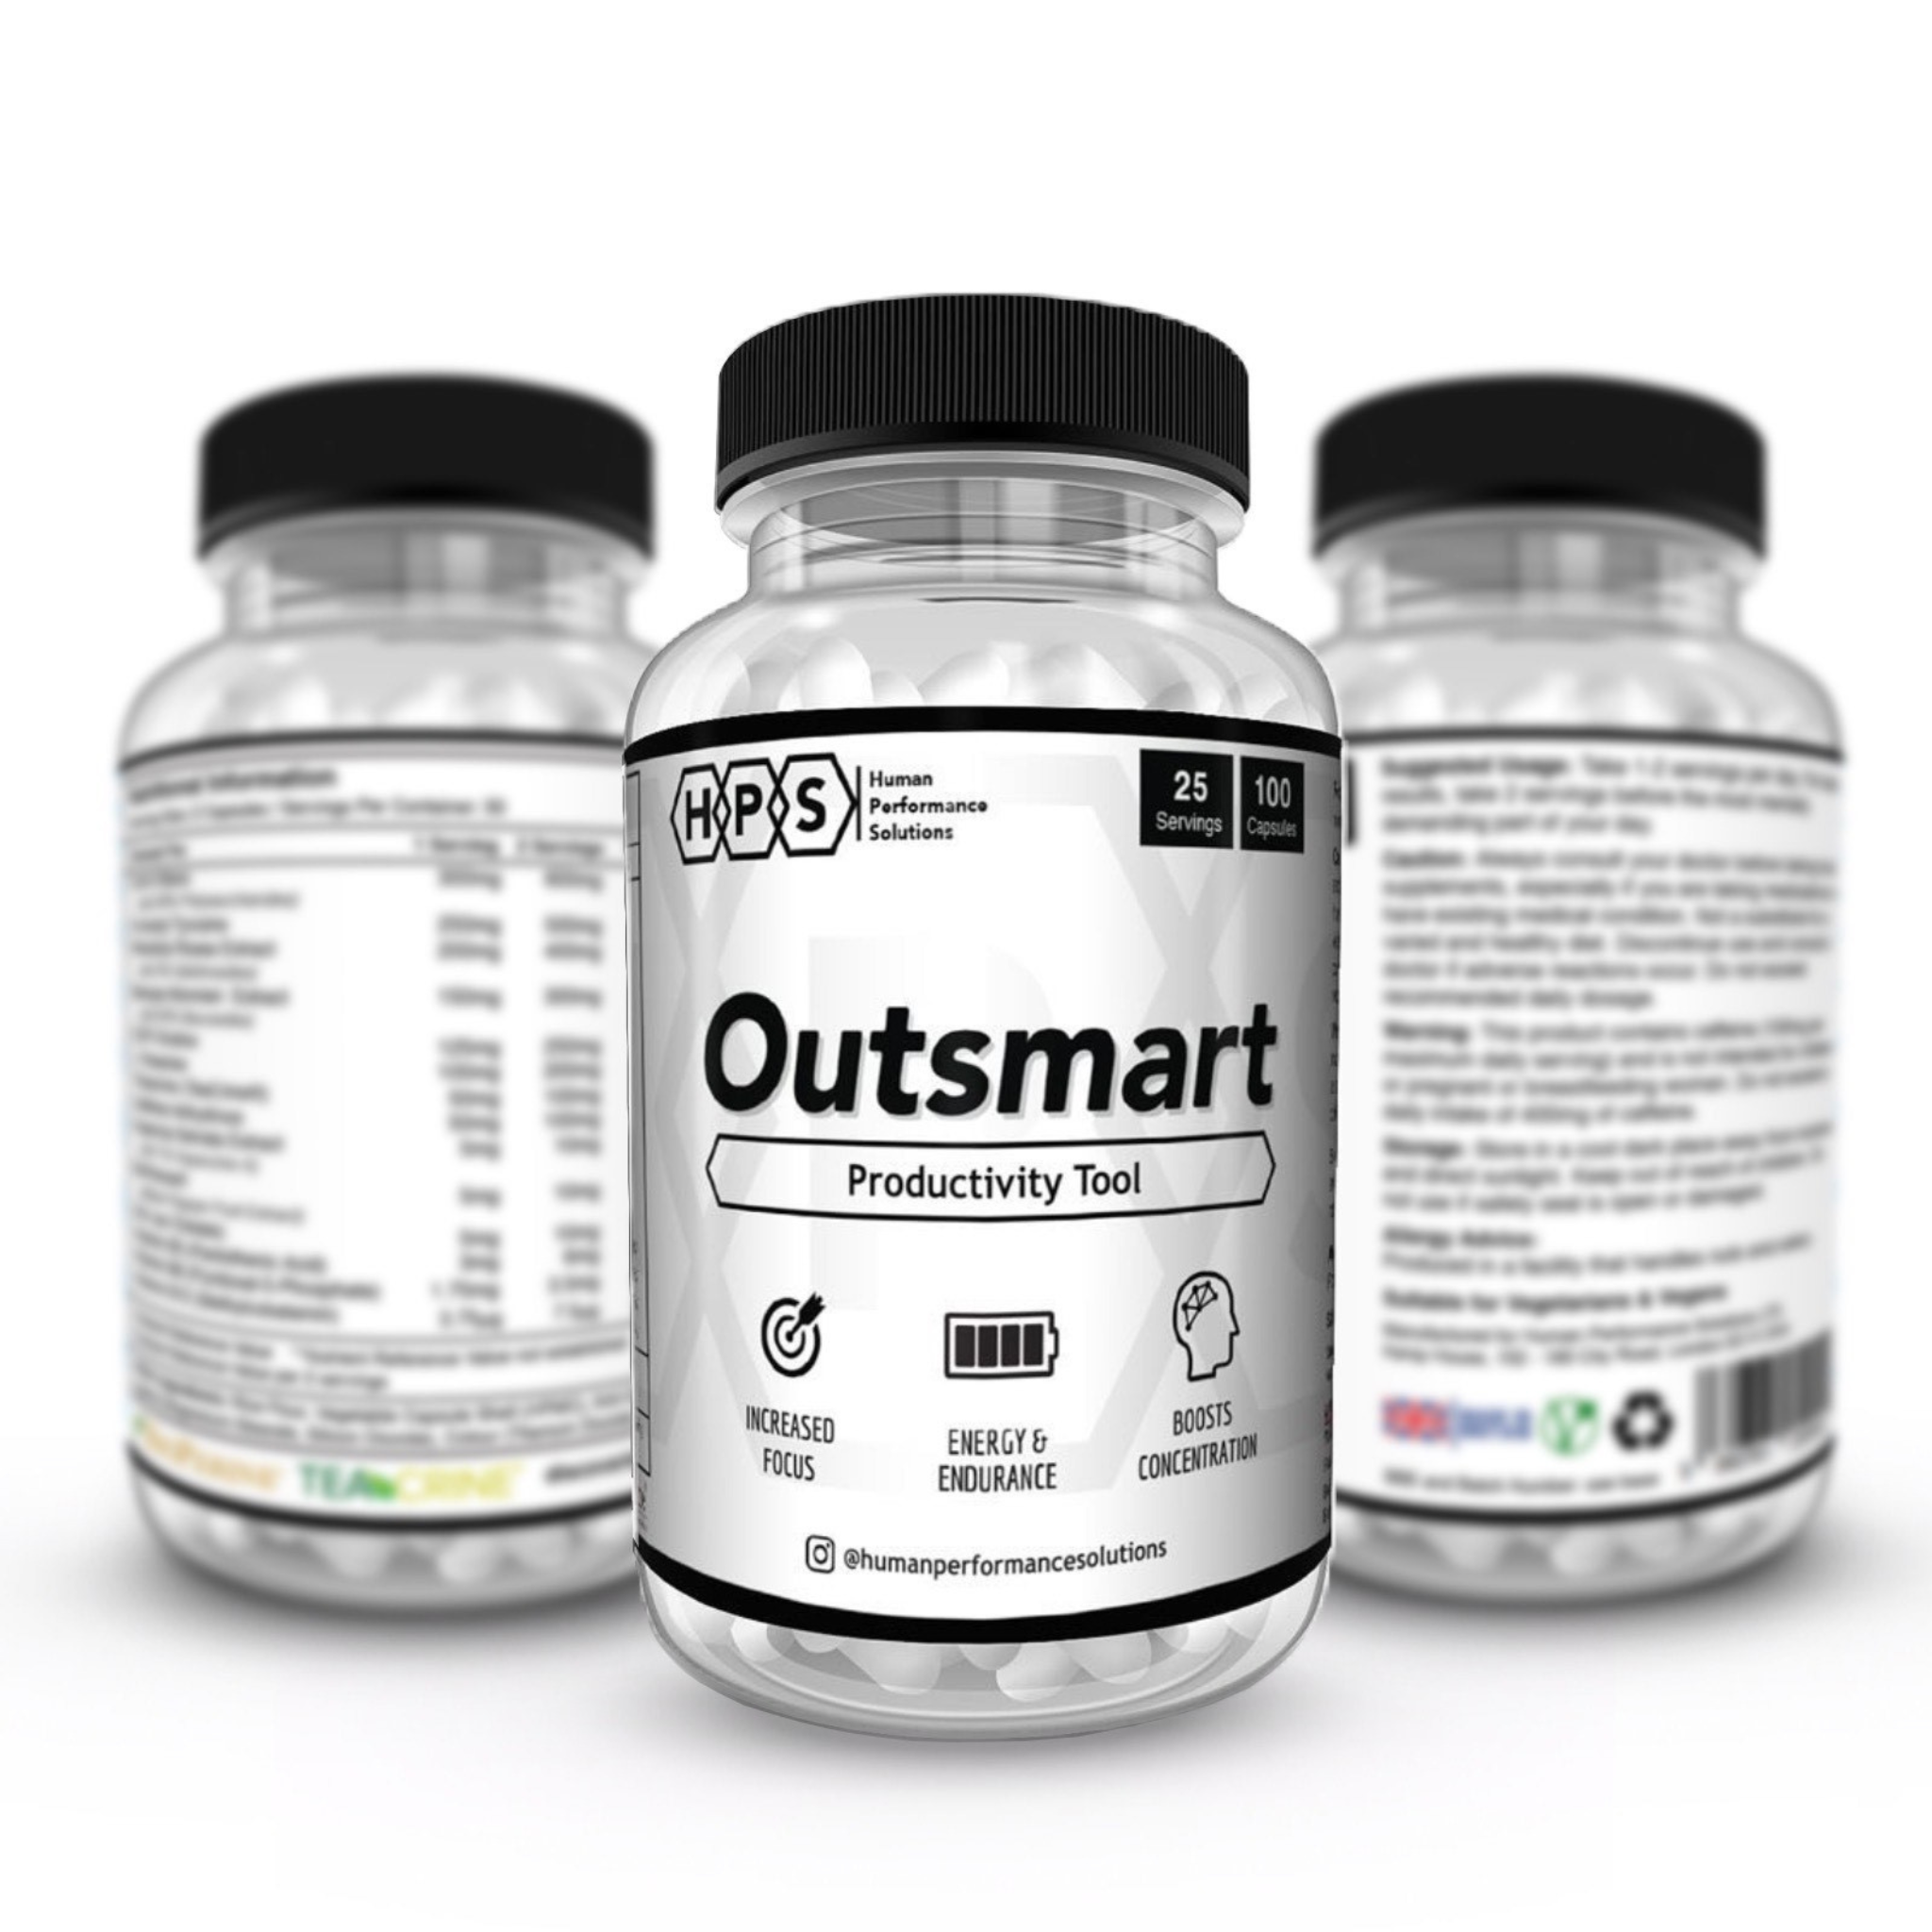 Outsmart V2 by Human Performance Solution